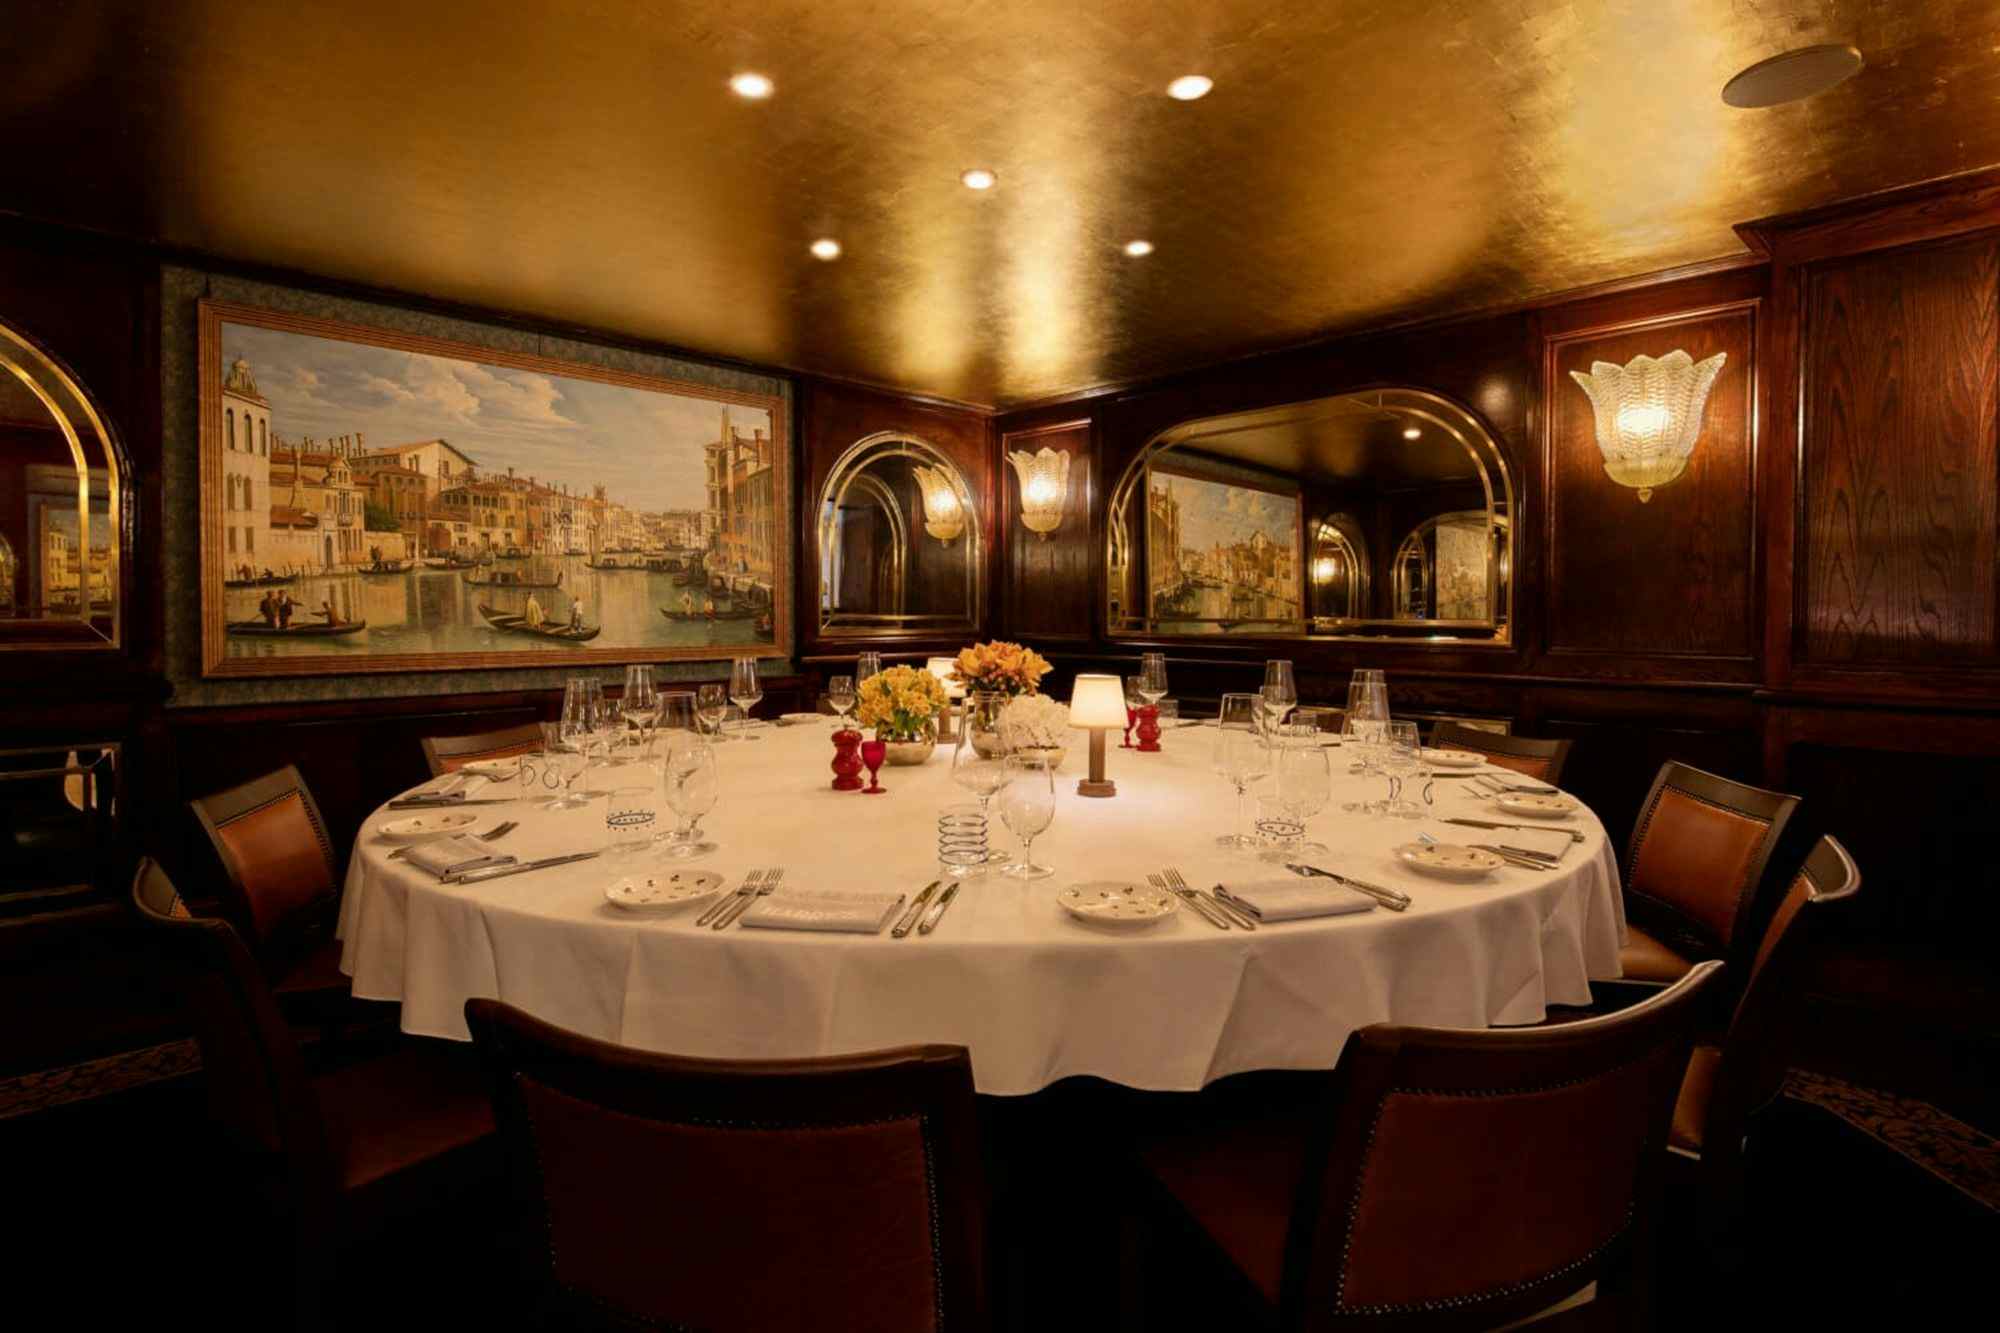 The Canaletto Room, Harry's Dolce Vita